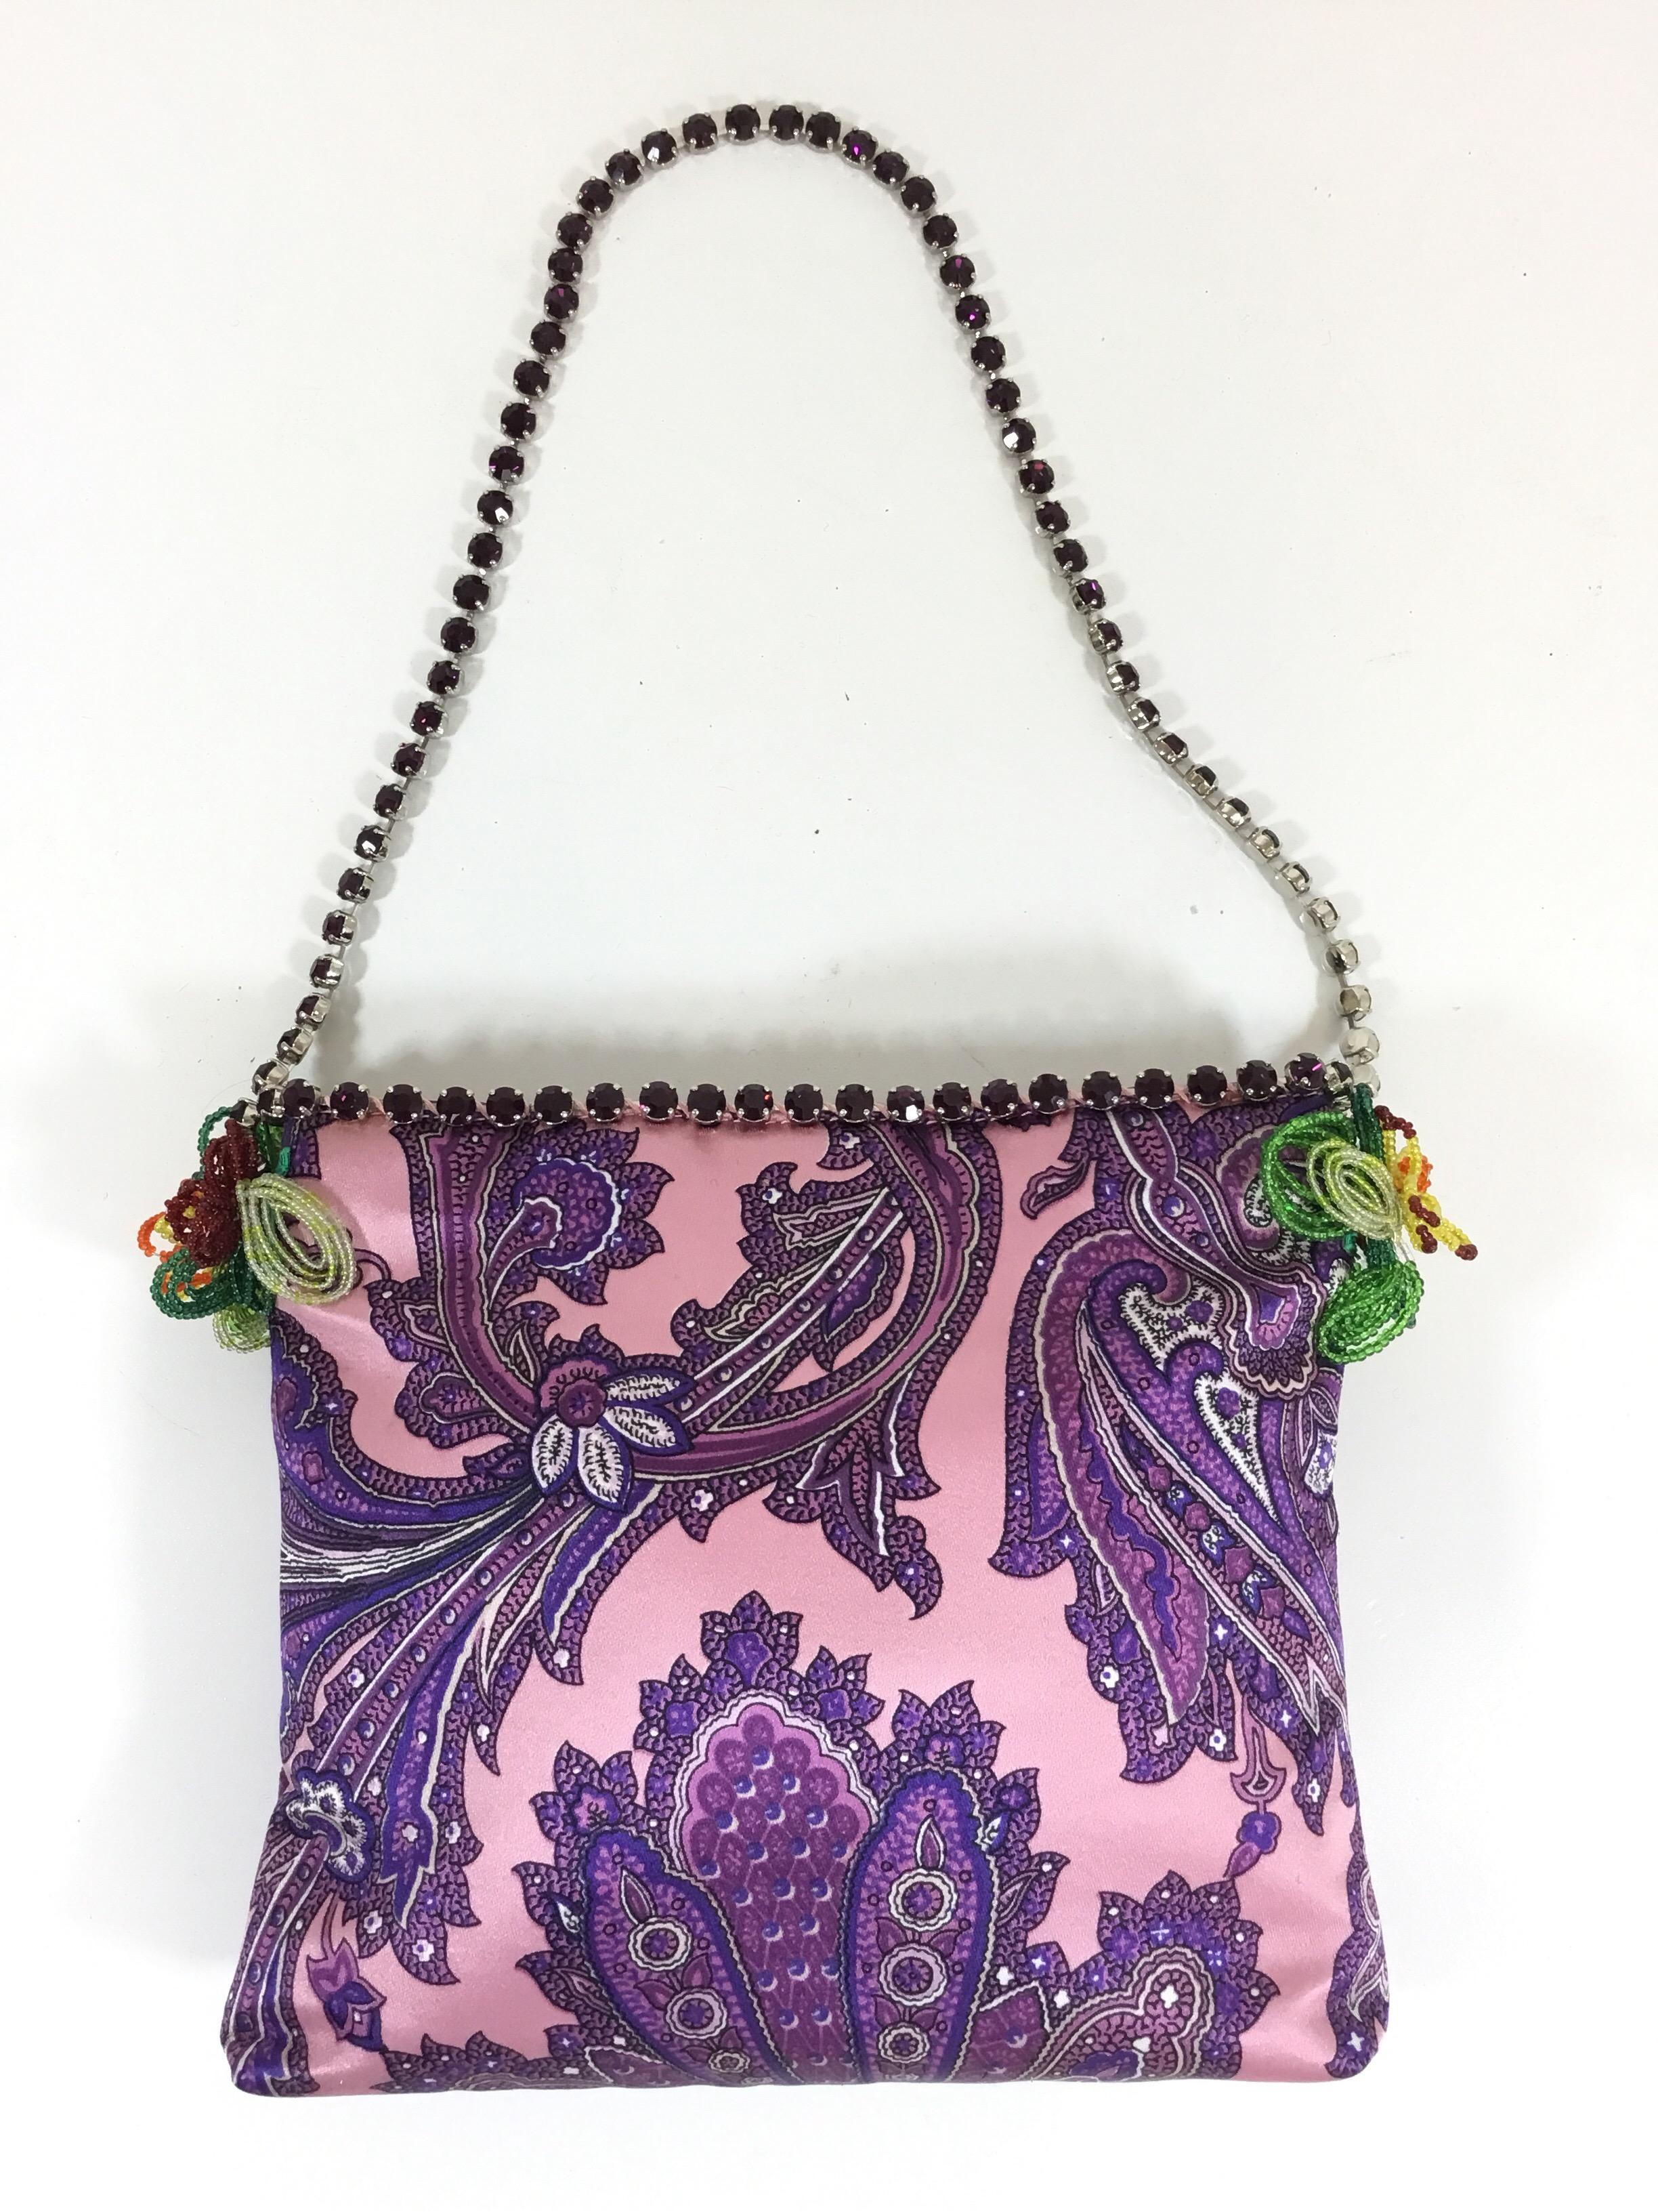 Dolce & Gabbana Evening Bag in purple with a rhinestone handle and beaded detail on the sides. There is a concealed magnetic closure, full lining in satin with one small slip pocket. Made in Italy


Measurements:
8’’ x 1’’ x 7’’, strapdrop 9’’